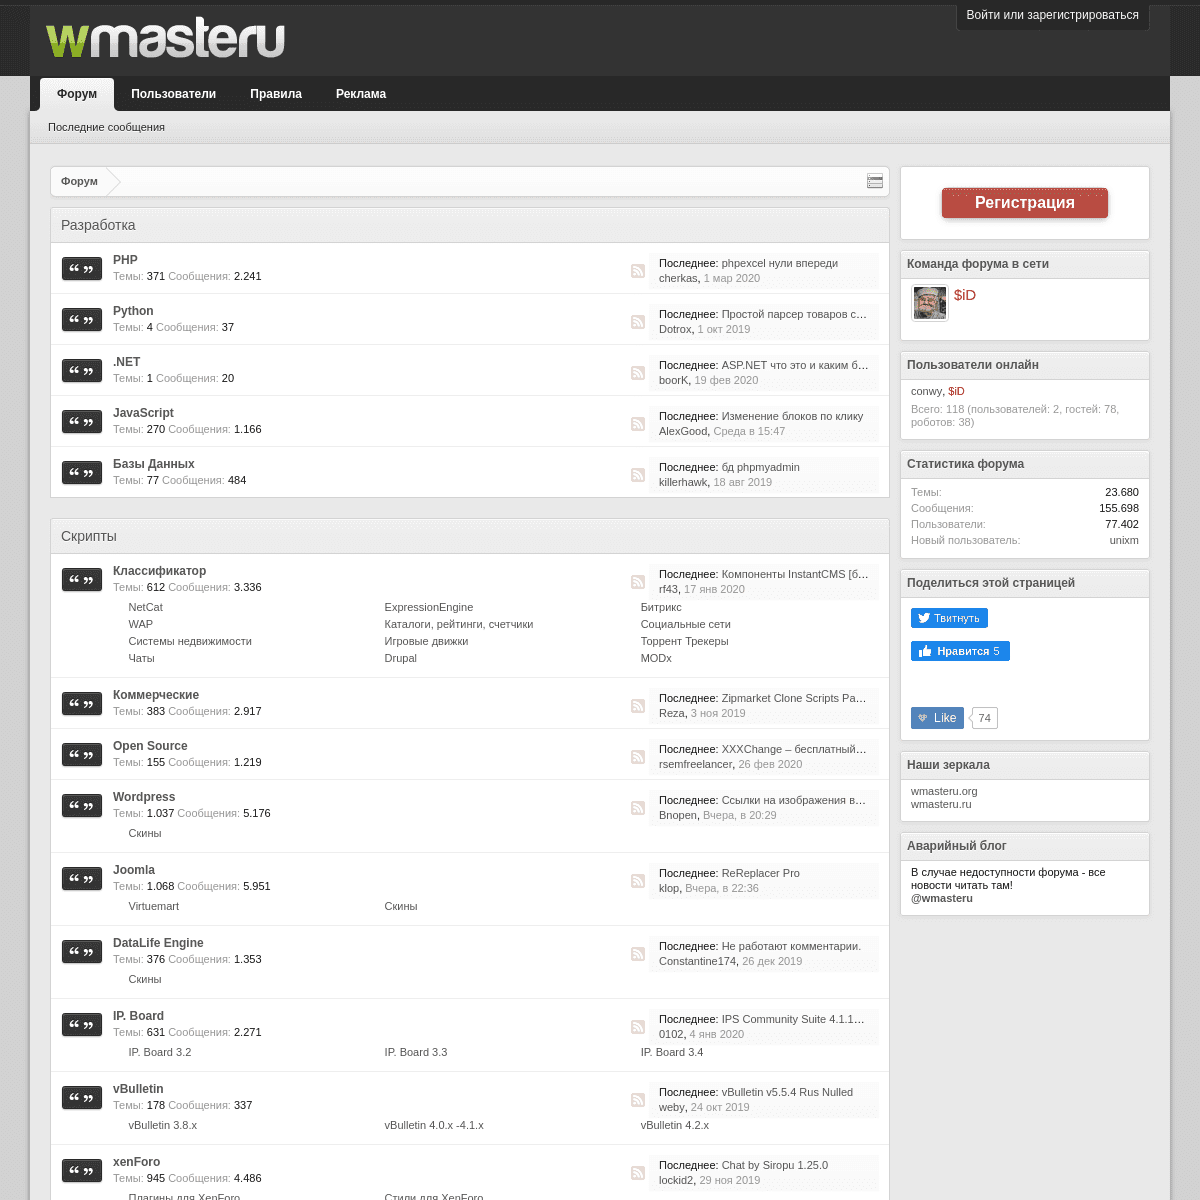 A complete backup of wmasteru.org